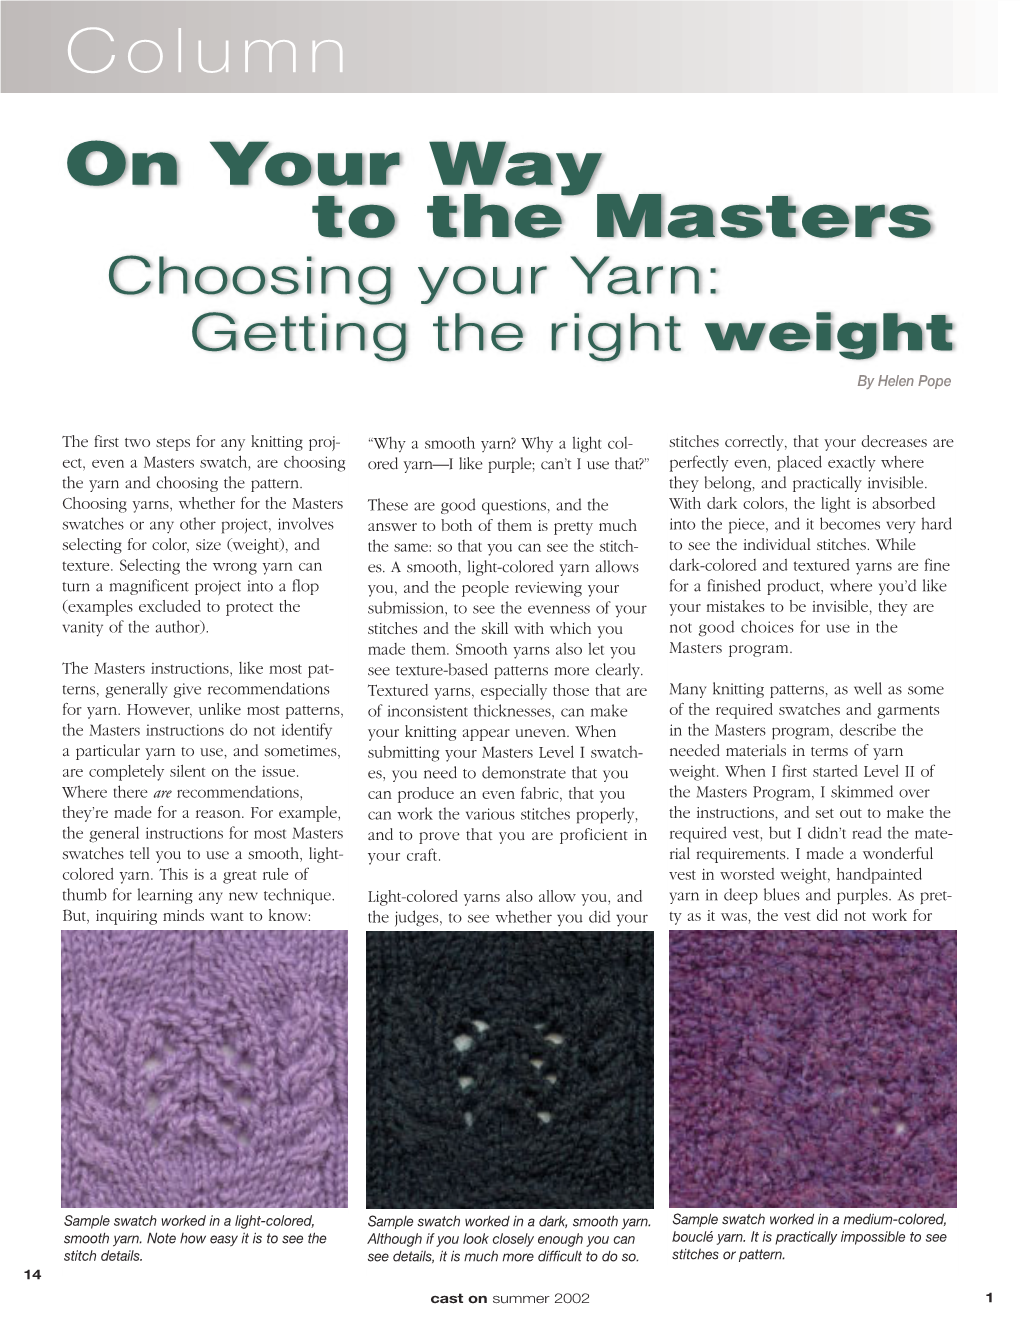 Column on Your Way to the Masters Choosing Your Yarn: Getting the Right Weight by Helen Pope